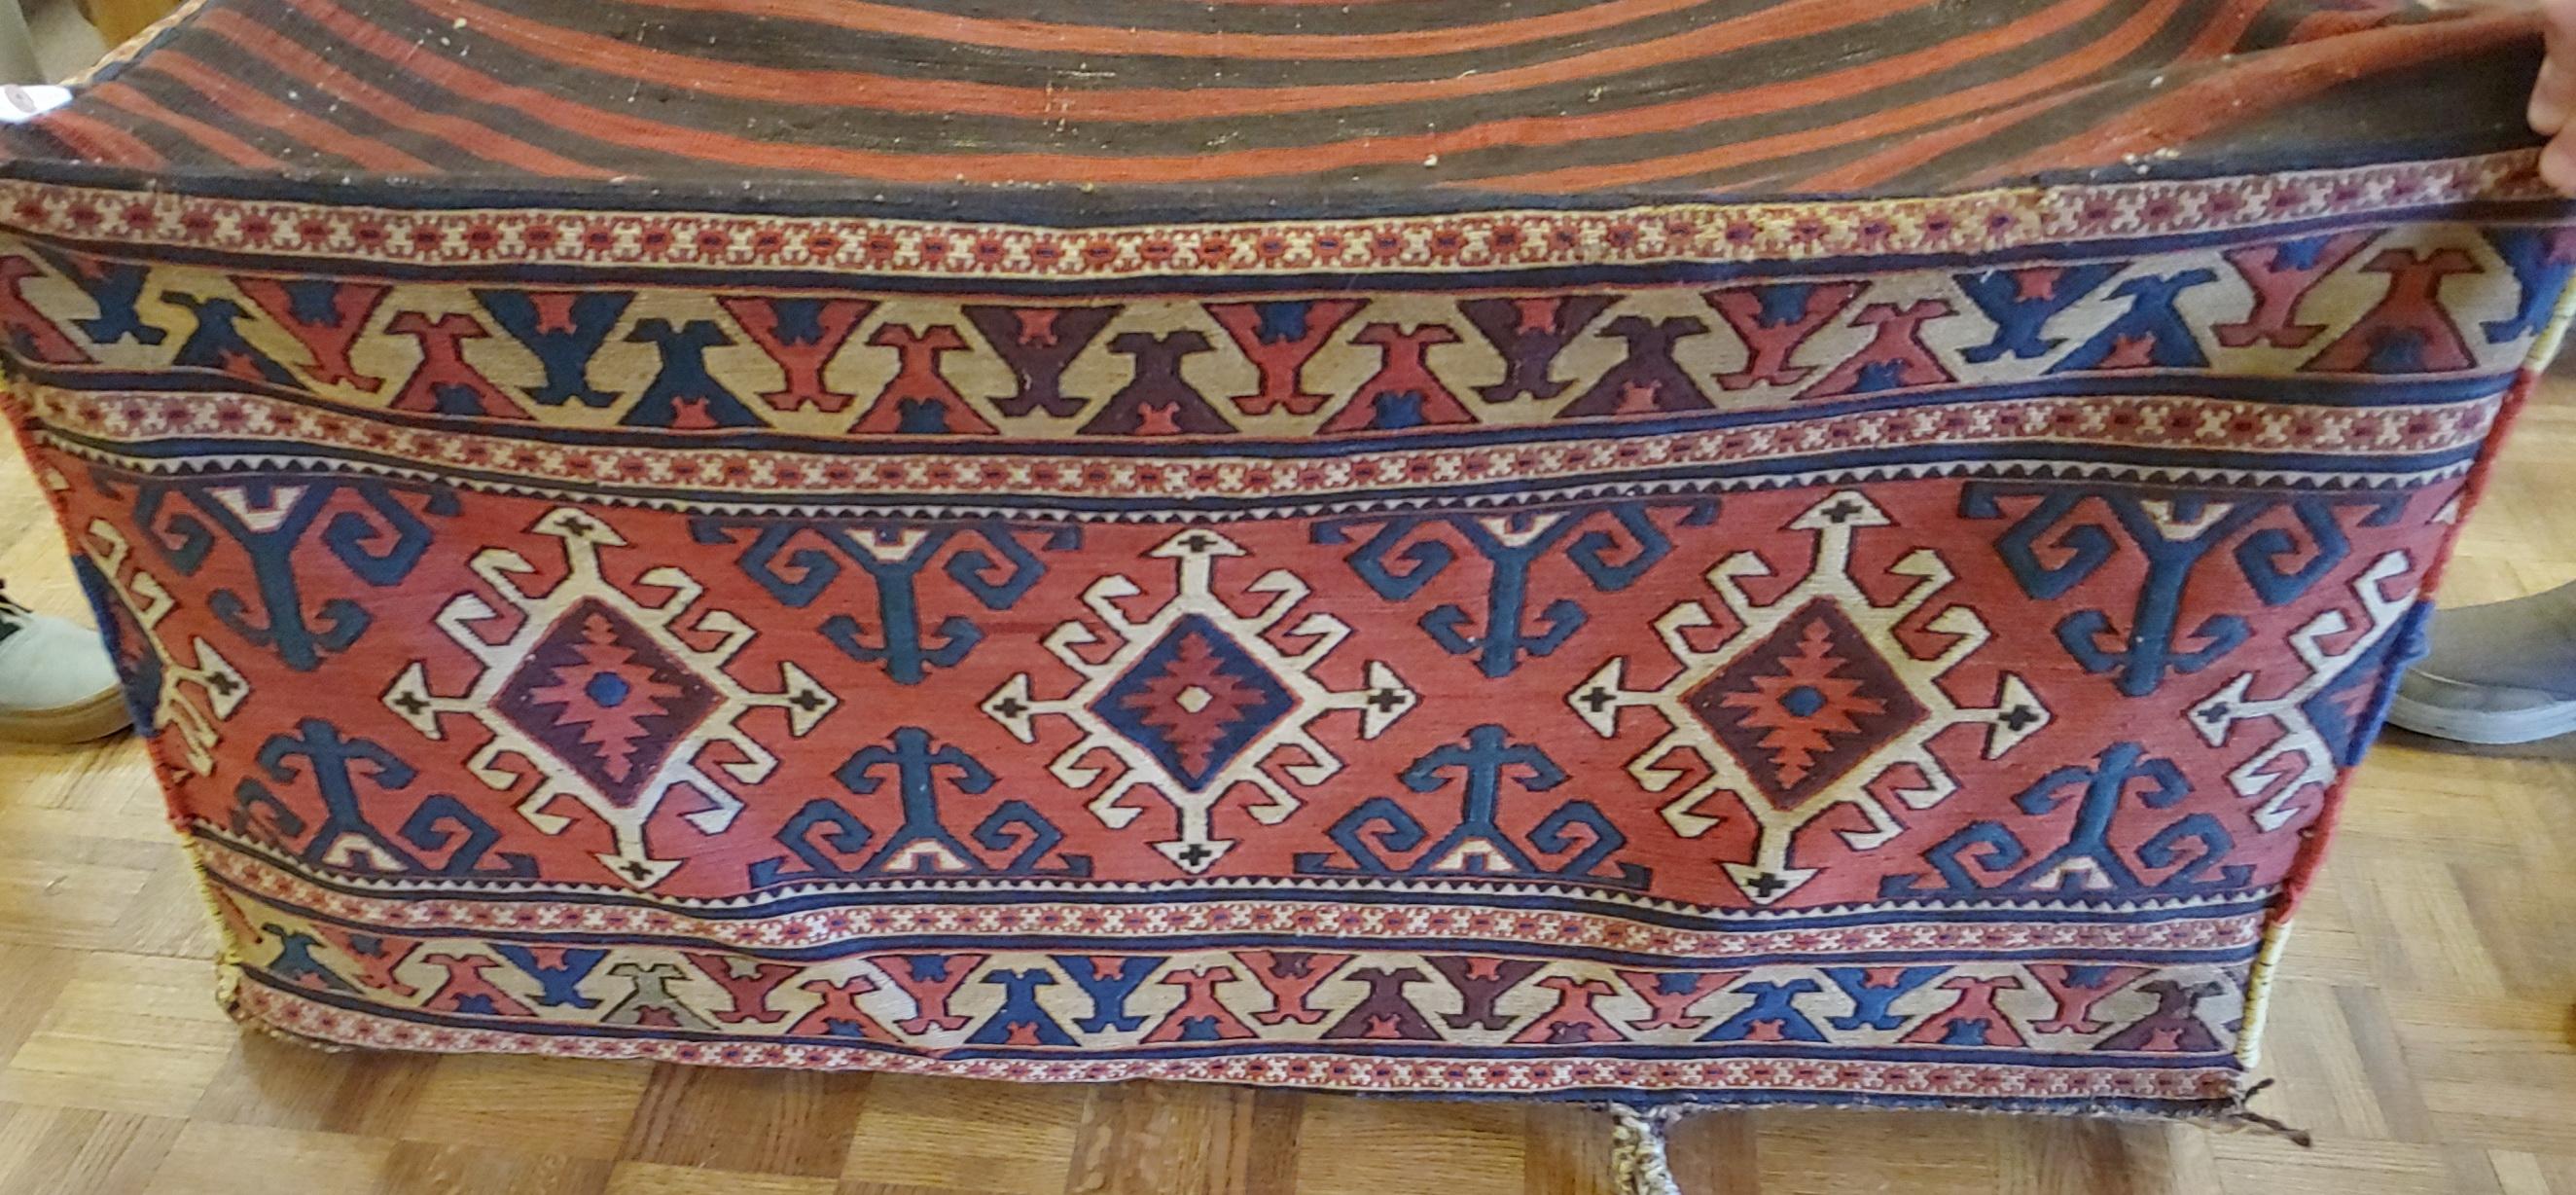 This is a Persian Shahsavan Mafrash from the Kuba district. These bags were used to store blankets & tents. The sides are flat-woven Soumak weave and the bottom is a Kelim weave. This piece is 1 &1/2 feet high by 1 &1/2 feet wide by 3&1/2 feet long.